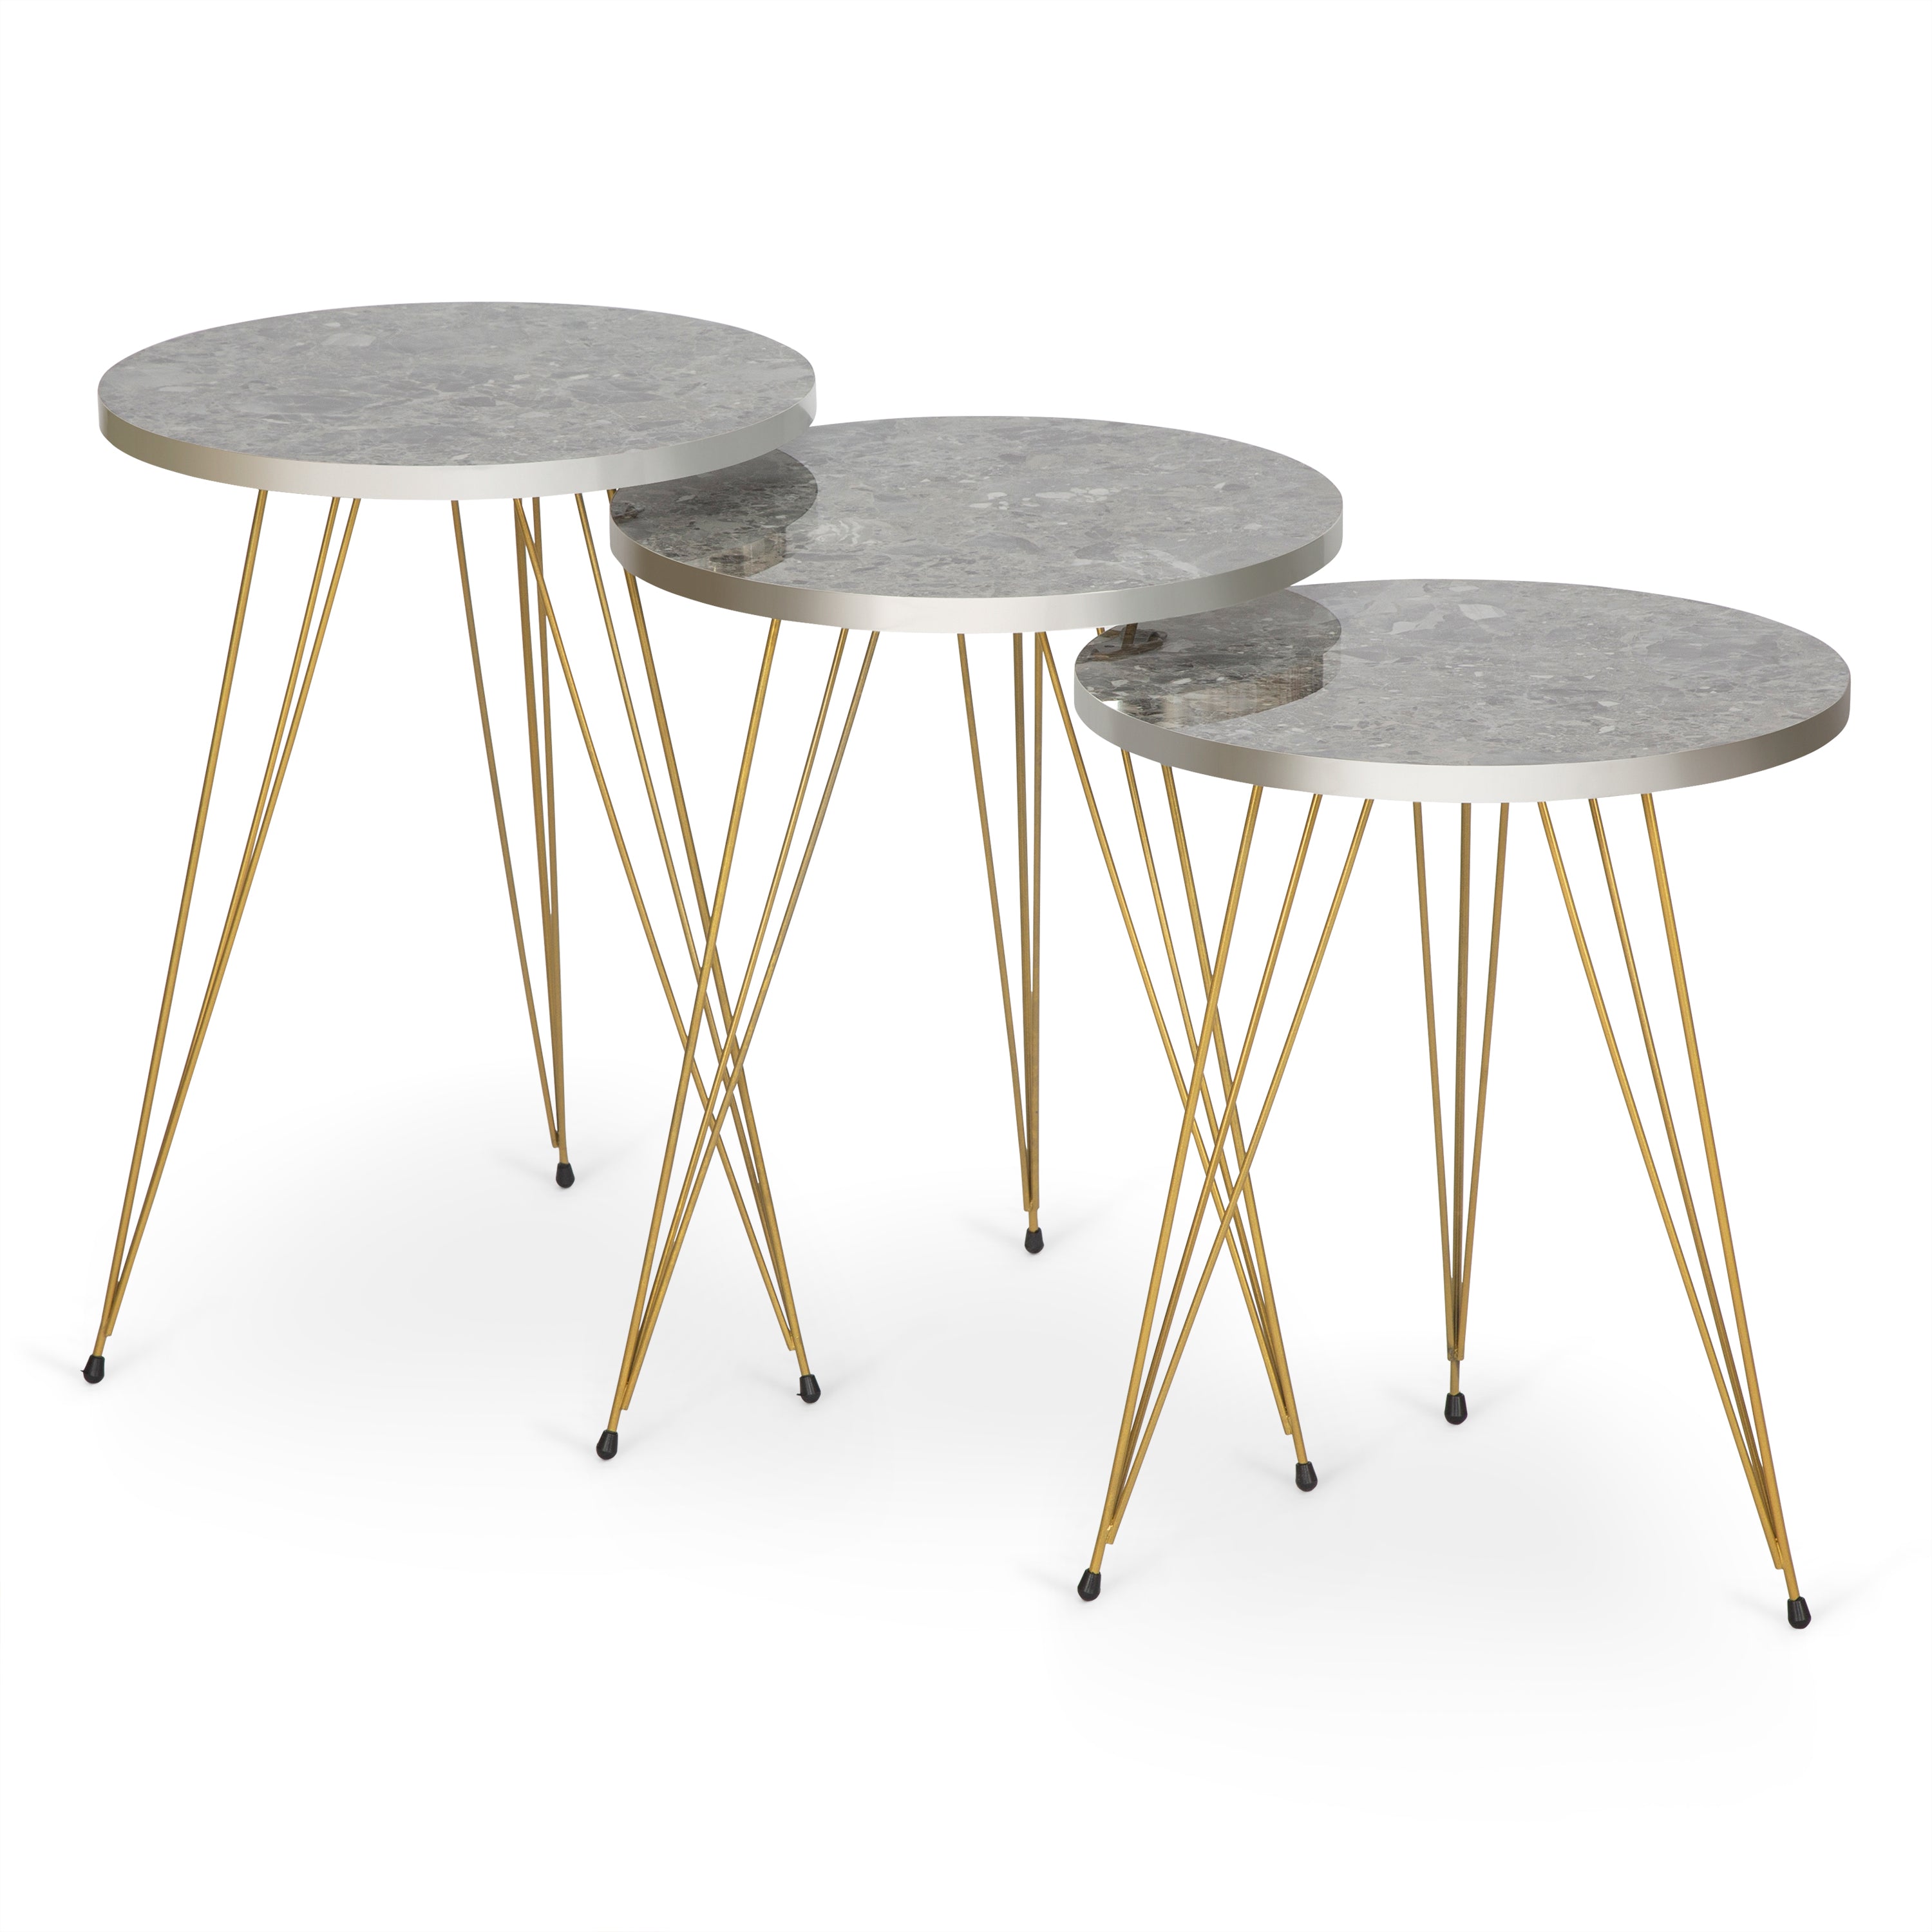 Tigris Set of 3 Round Side Tables - Grey Marble & Gold